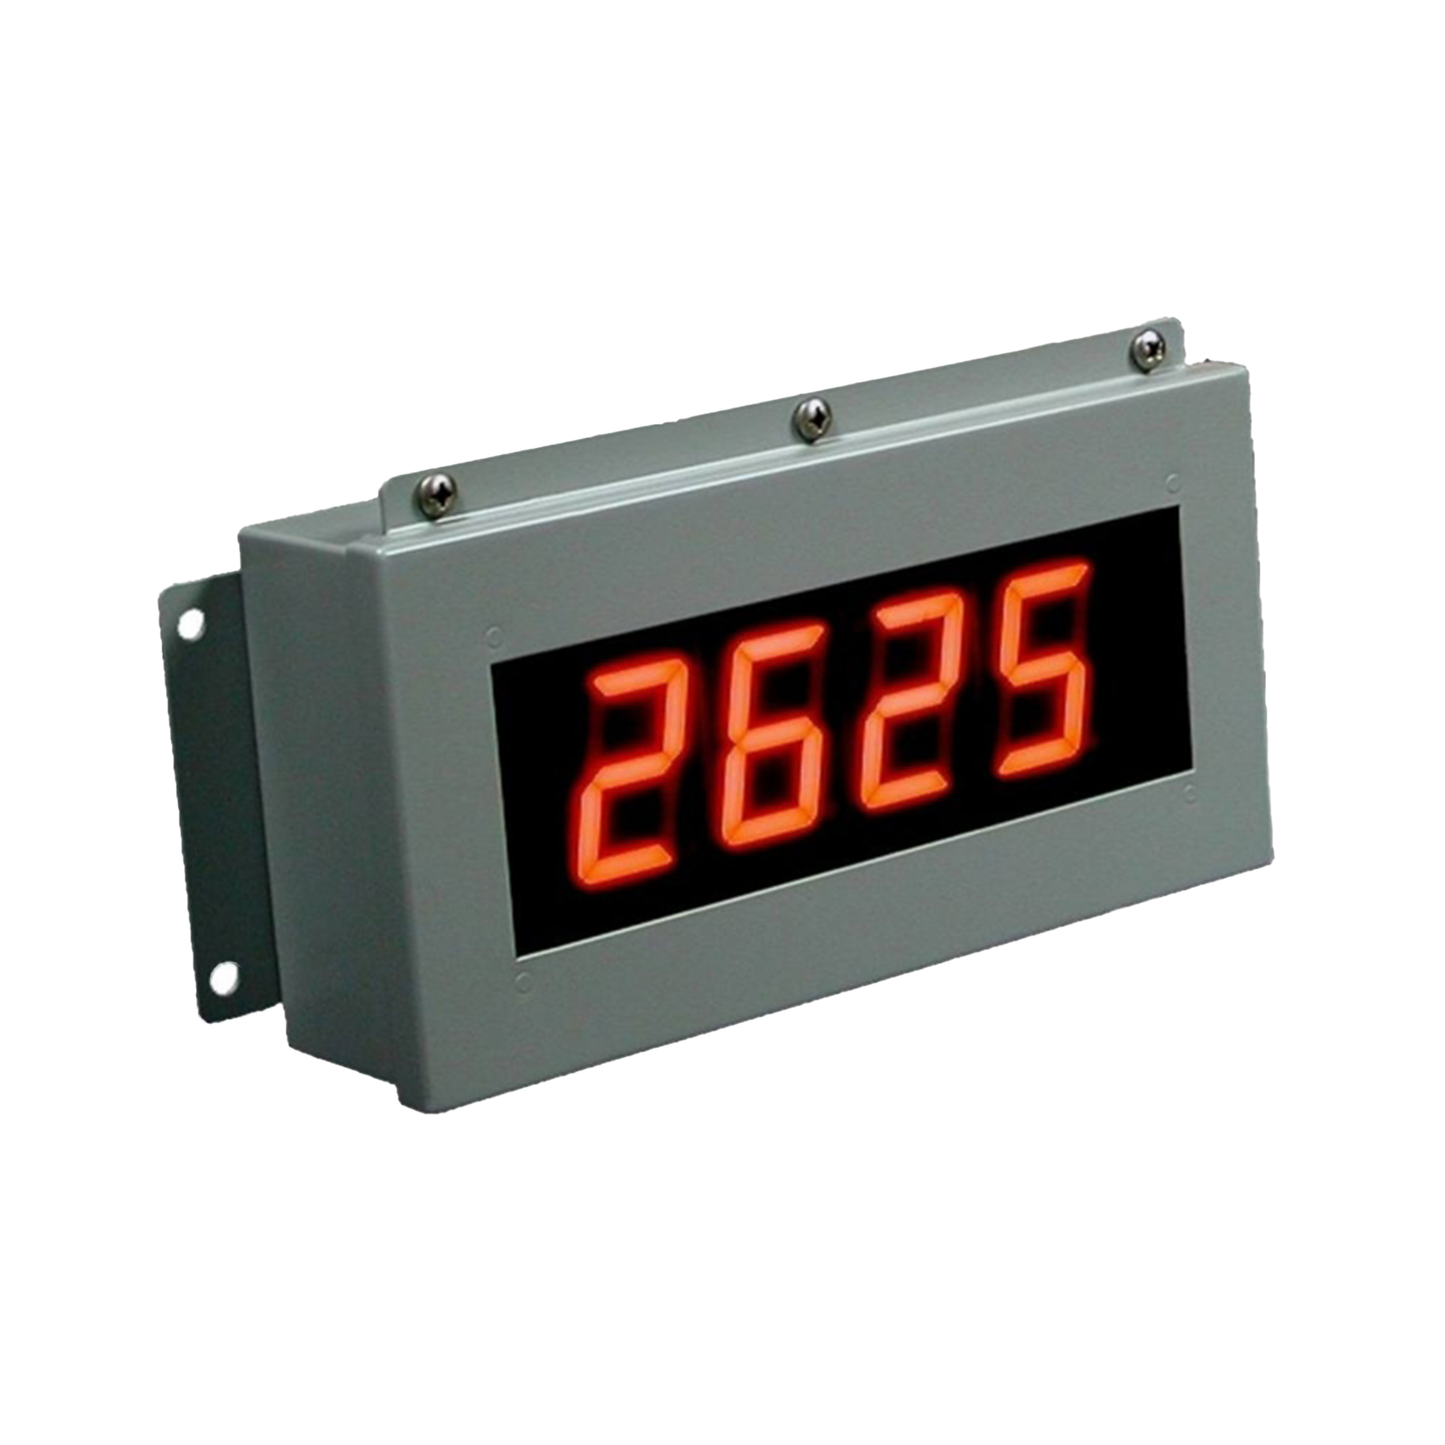 2 Inch LED Counter or Timer